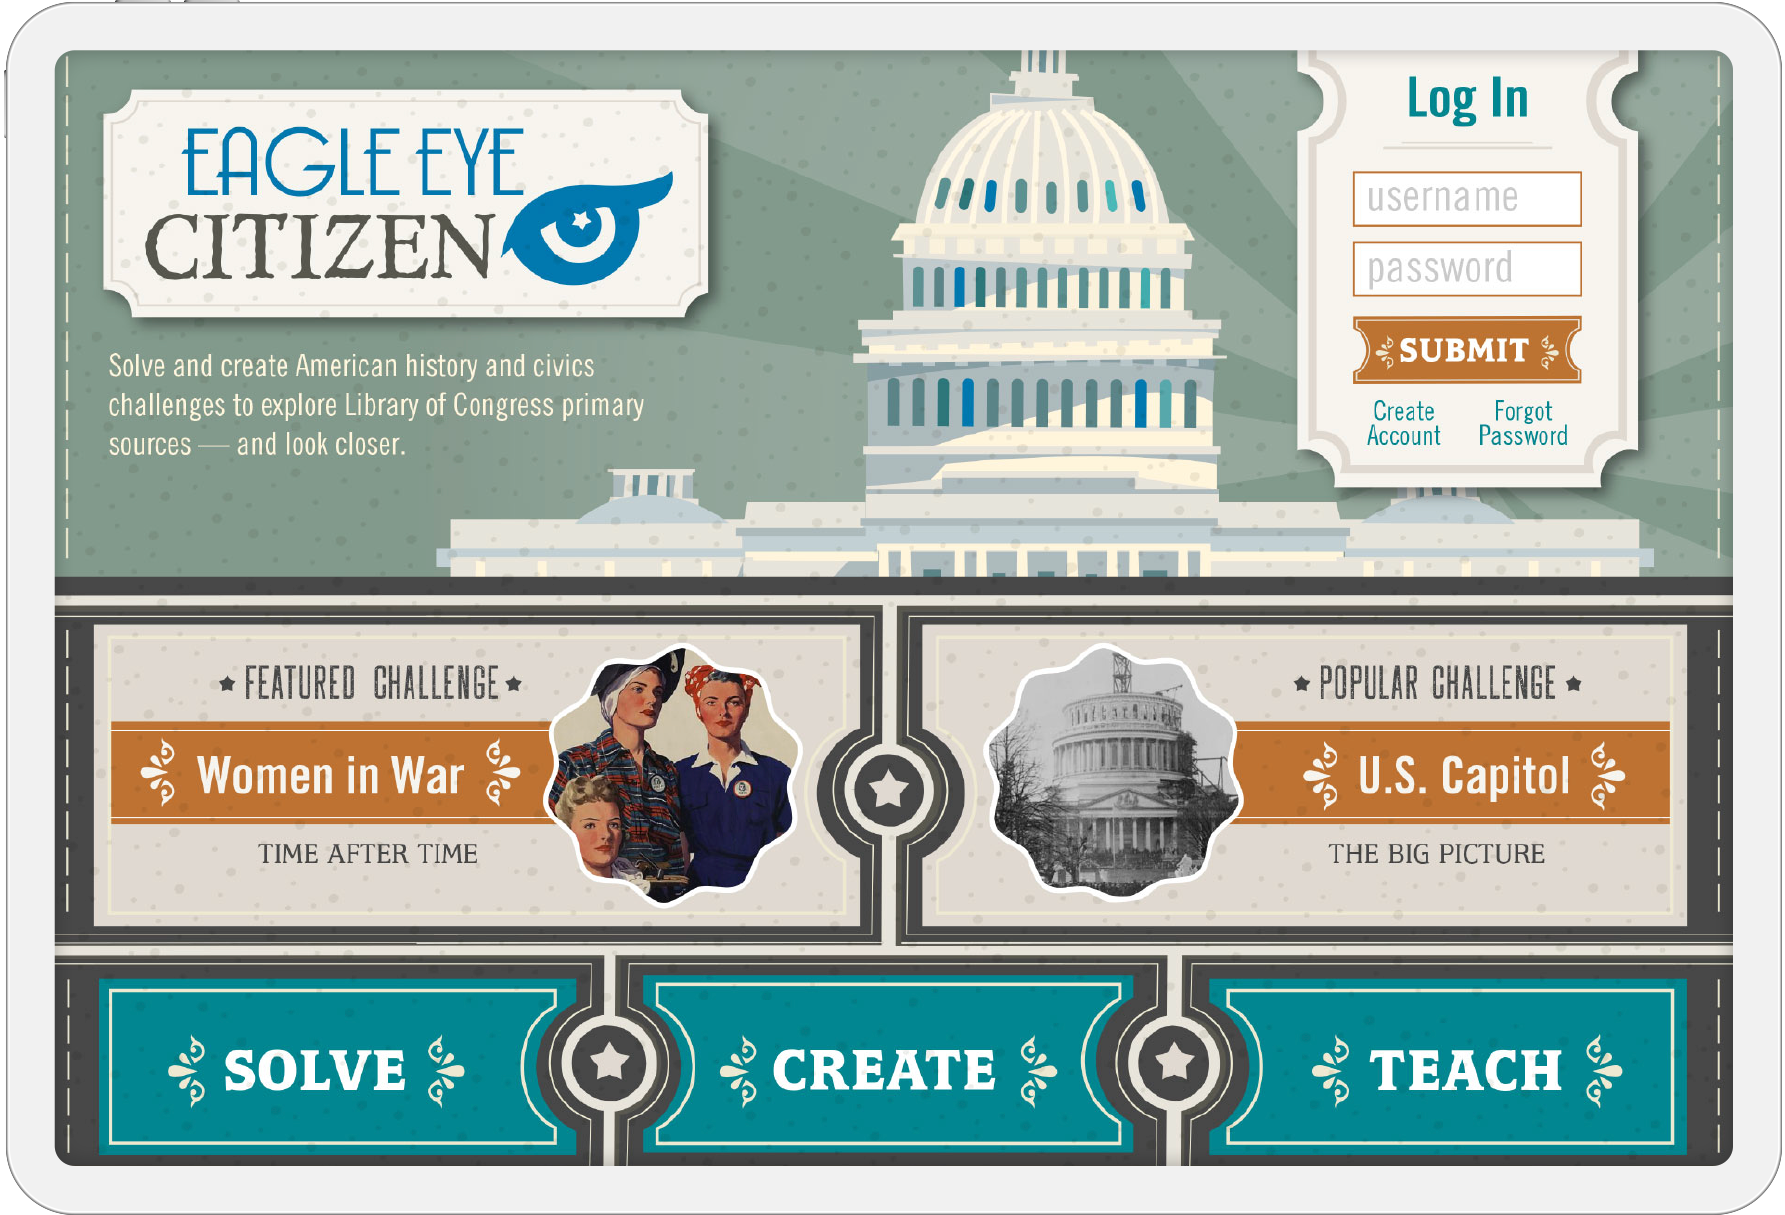 Screengrab of the Eagle Eye Citizen website landing page.